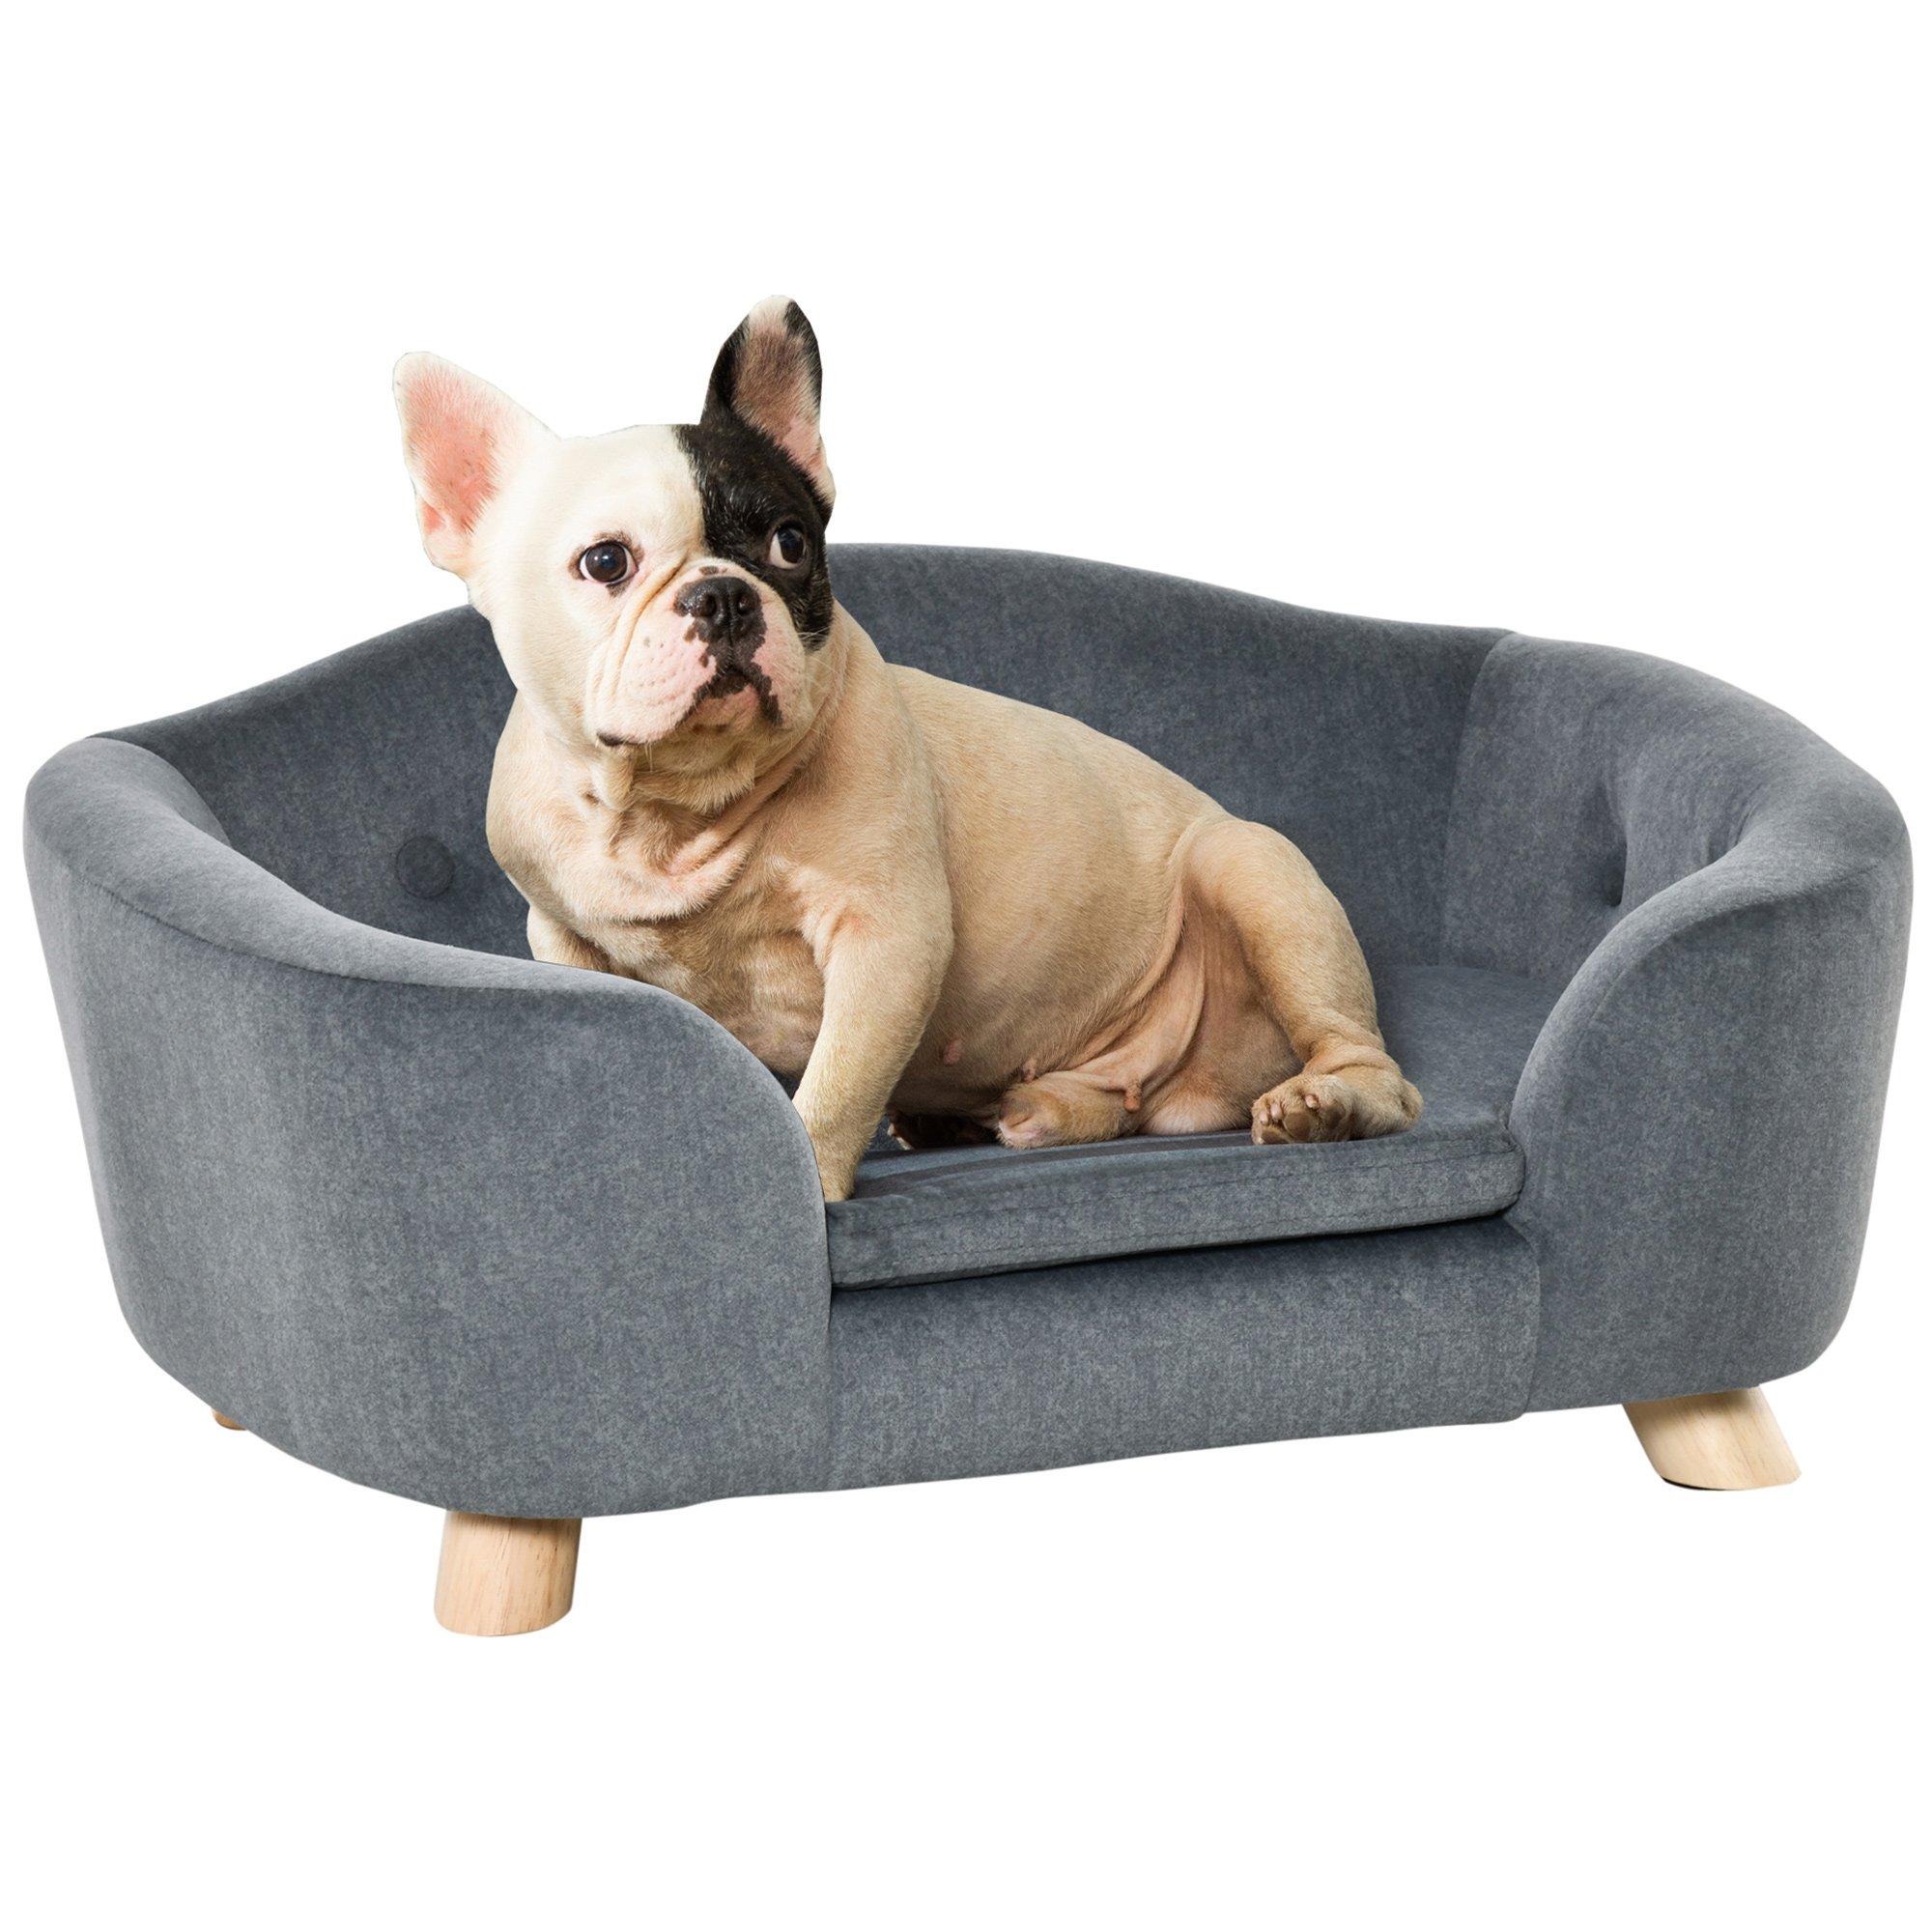 Pet Sofa Puppy Kitten Lounge, with Wooden Frame, Washable Cushion for Small Dog